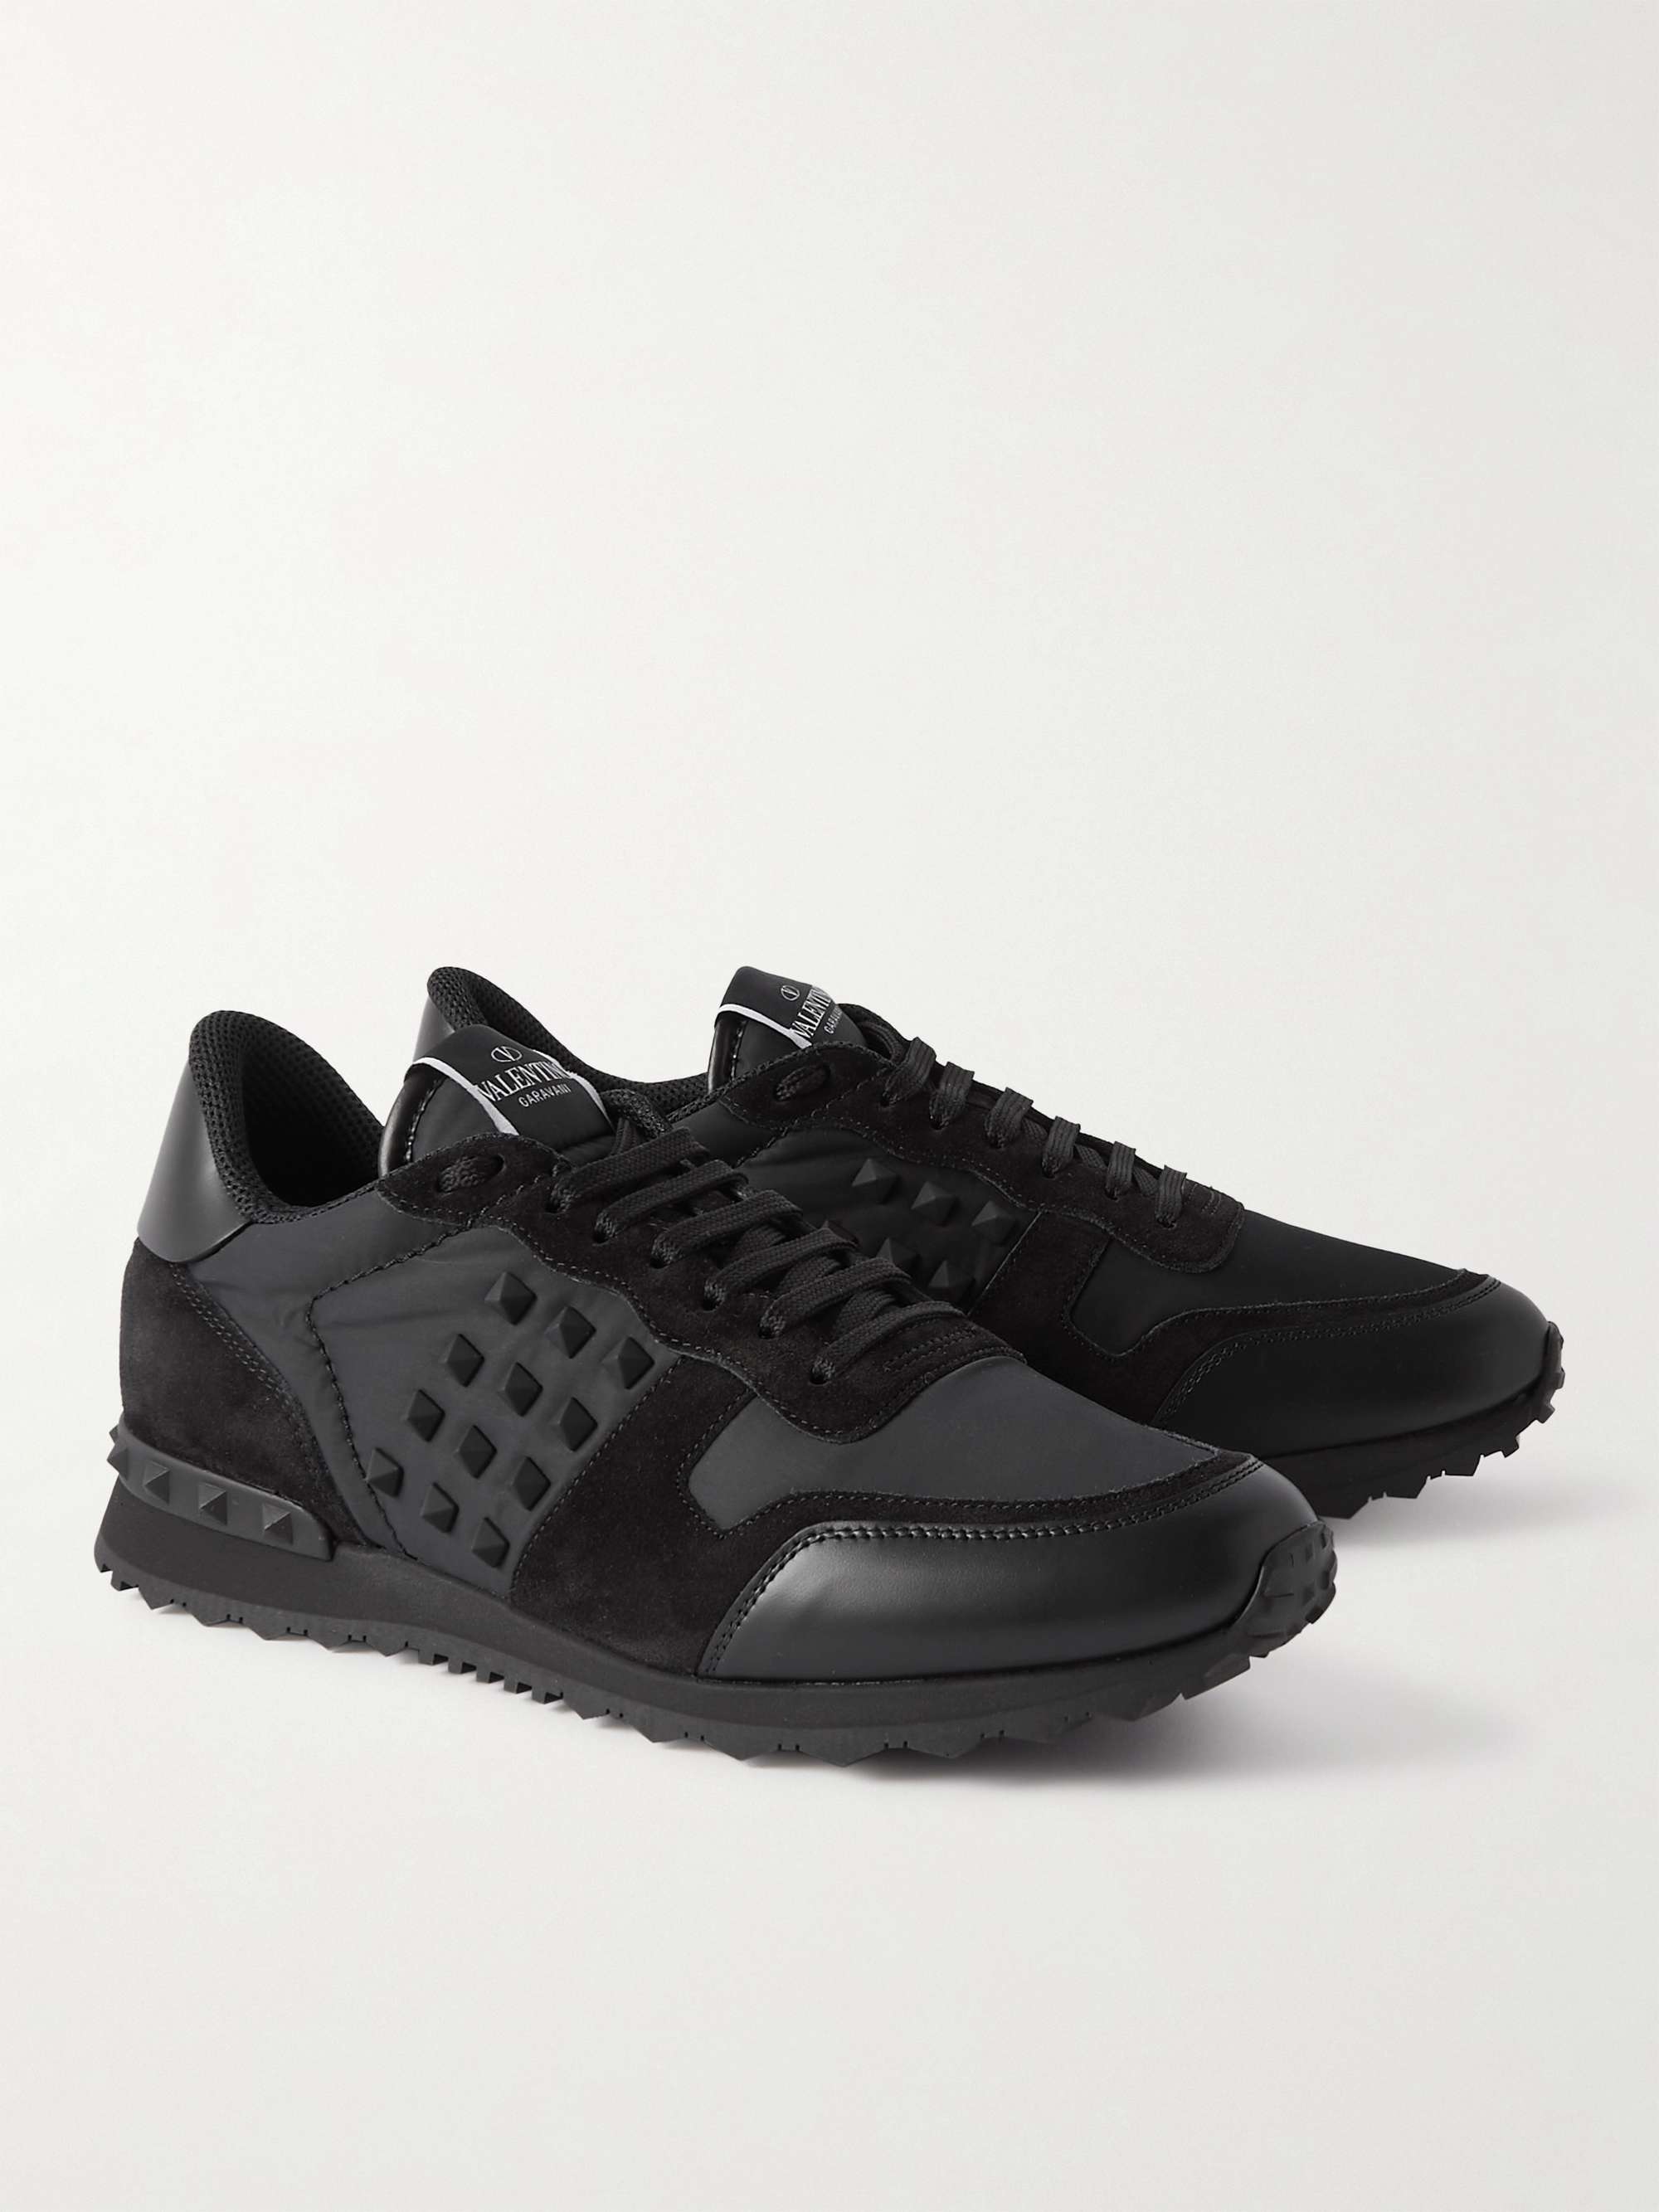 VALENTINO Valentino Garavani Rockstud Leather-Trimmed Suede and Shell Sneakers